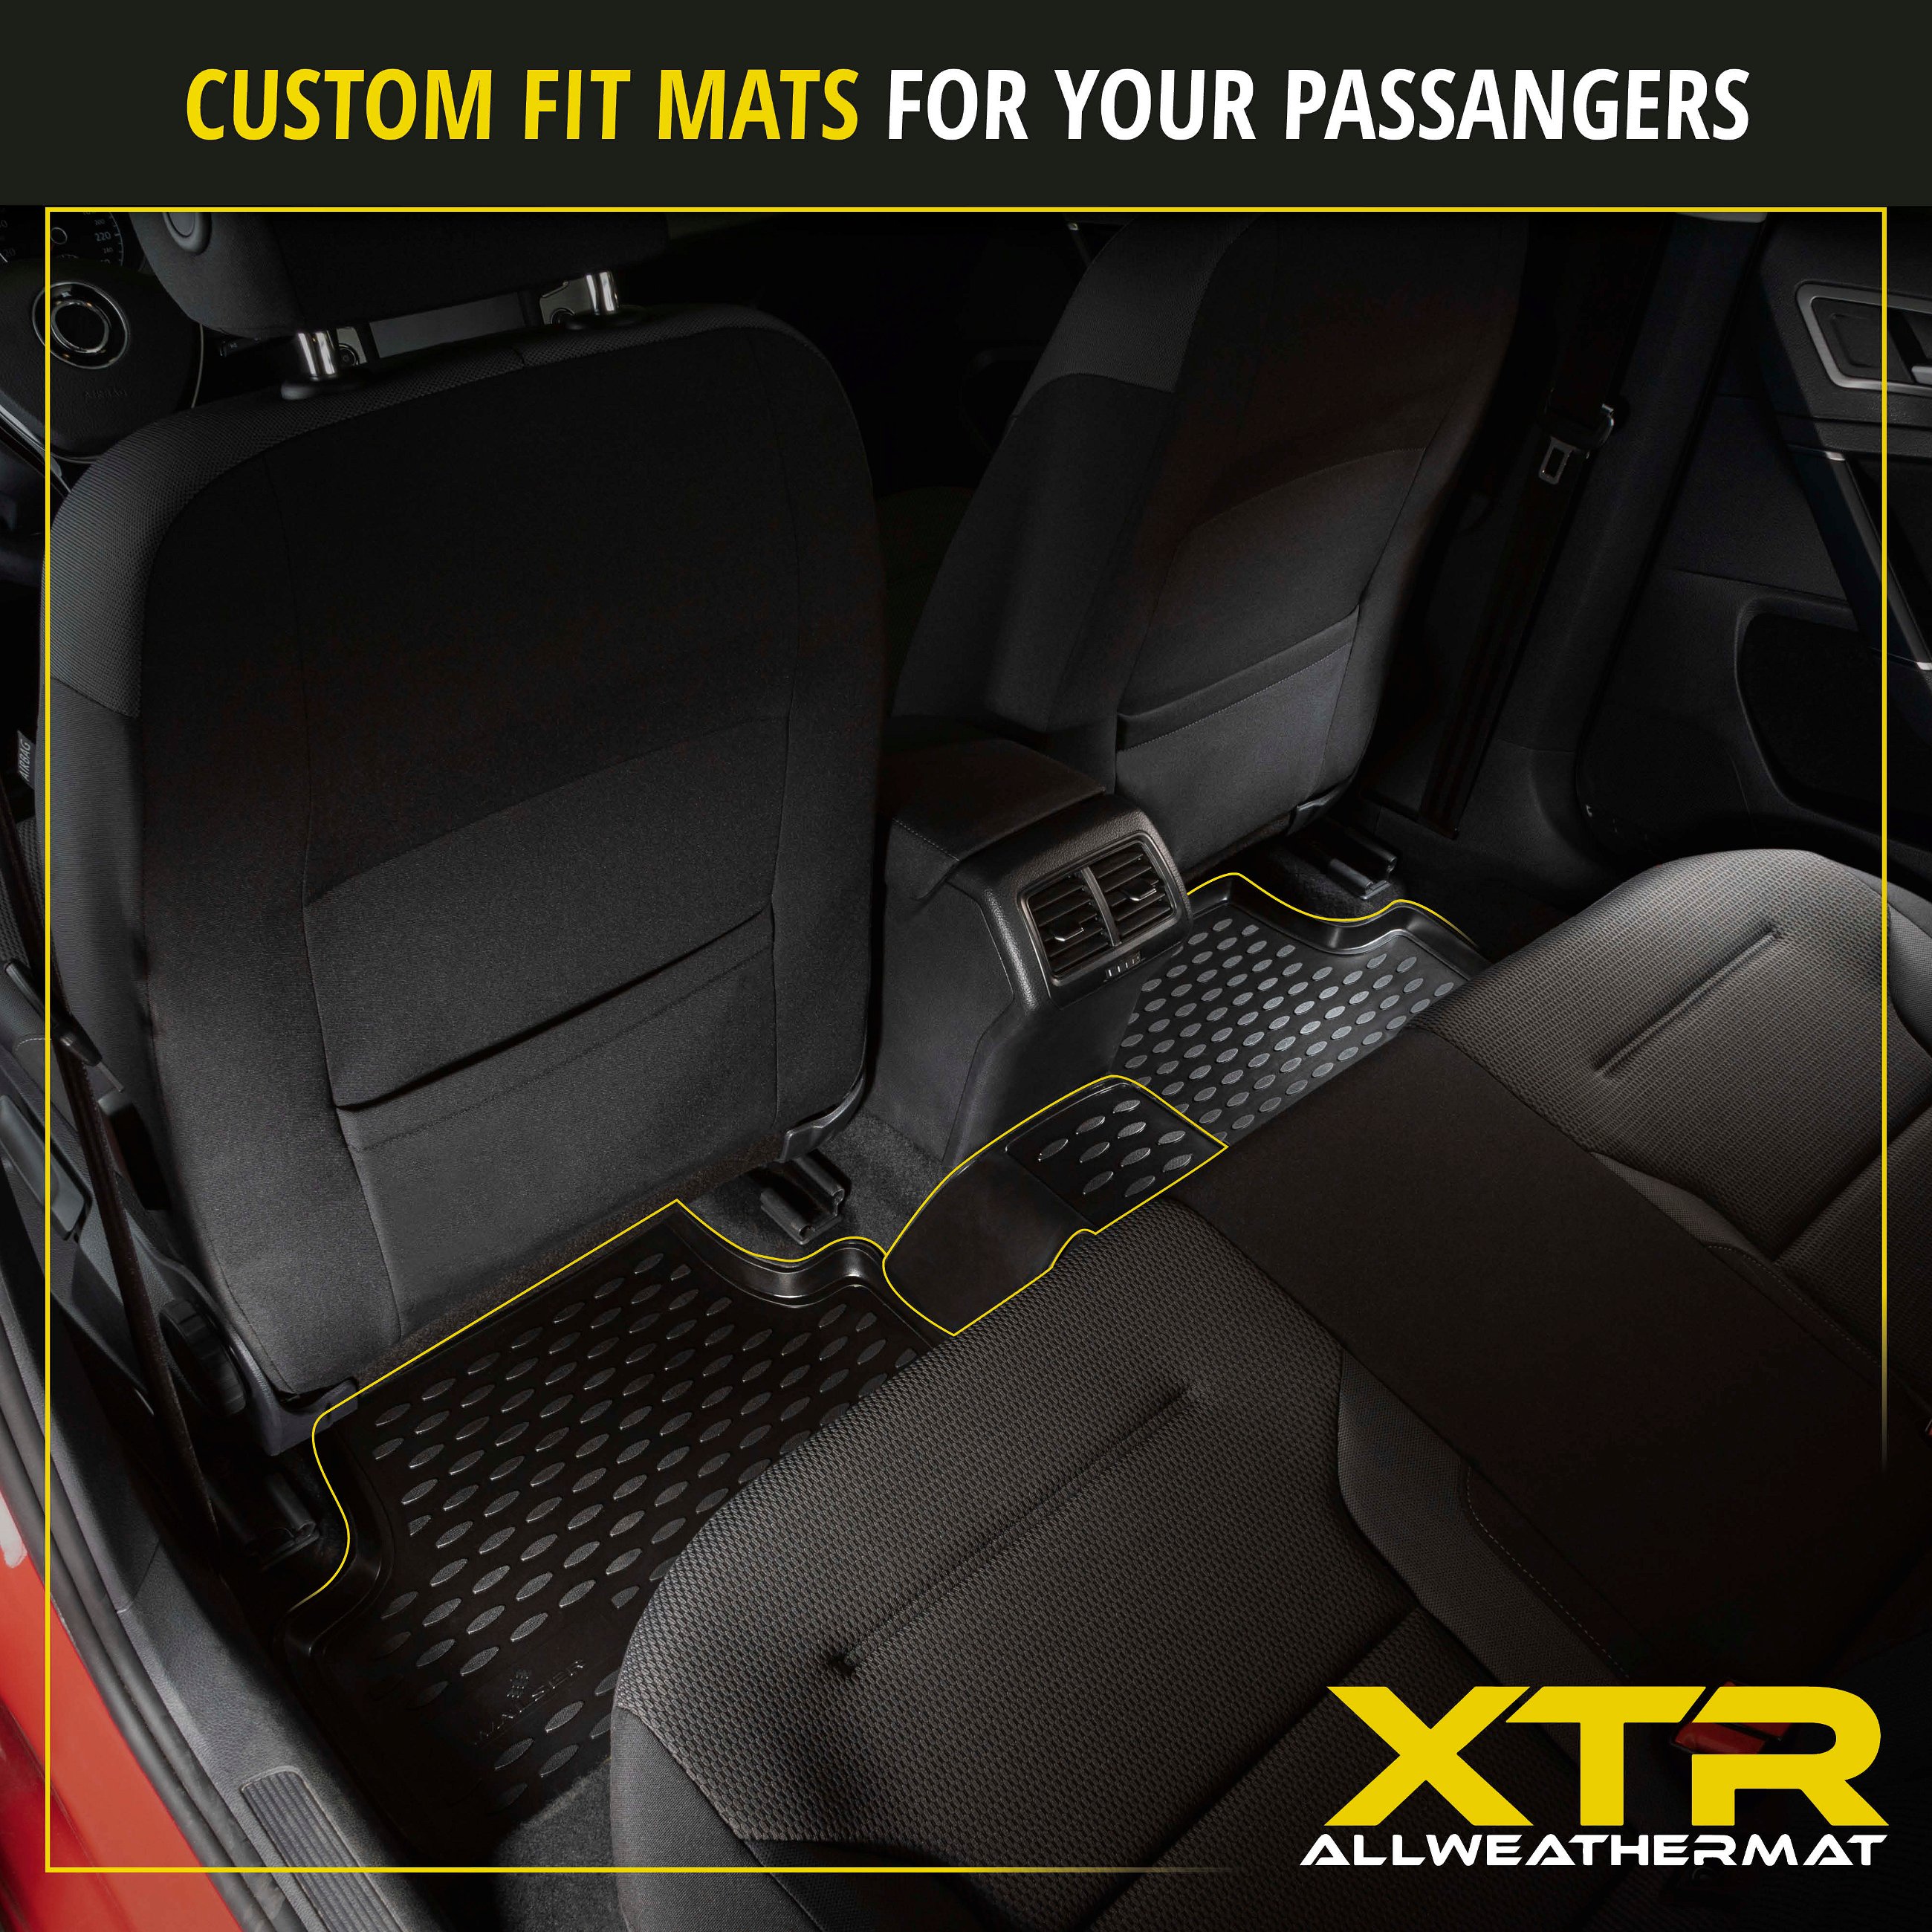 XTR Rubber Mats for Ford Focus II Turnier 07/2004 - 09/2012, Focus II notchback 04/2005-Today, Focus II Cabriolet 10/2006 - 09/2010